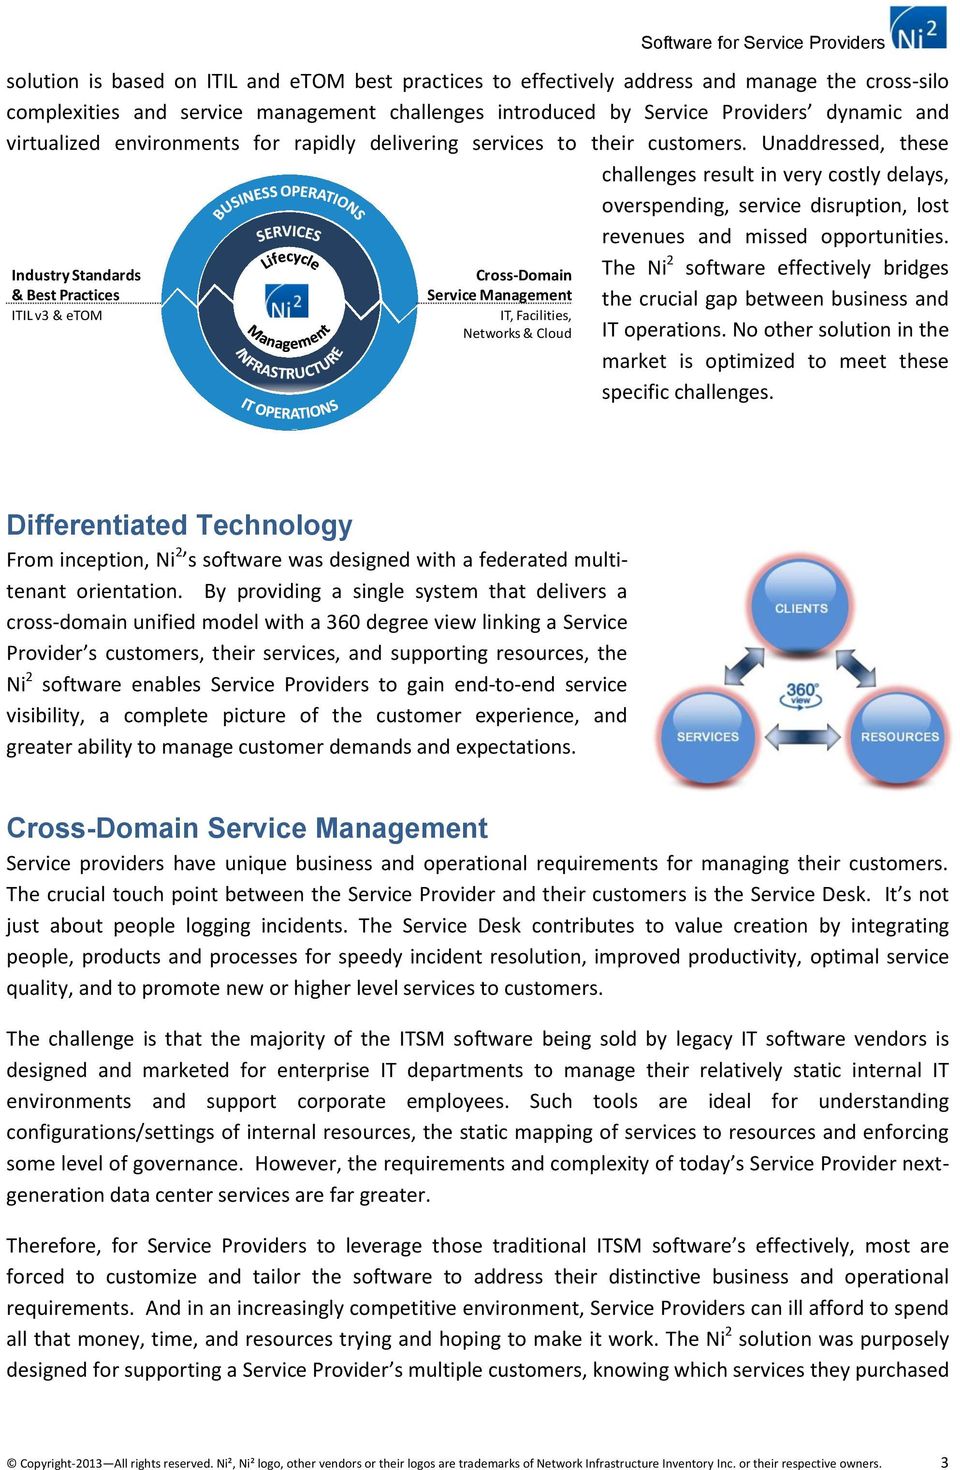 The Ni 2 software effectively bridges Industry Standards & Best Practices ITIL v3 & etom Cross-Domain IT, Facilities, Networks & Cloud the crucial gap between business and IT operations.